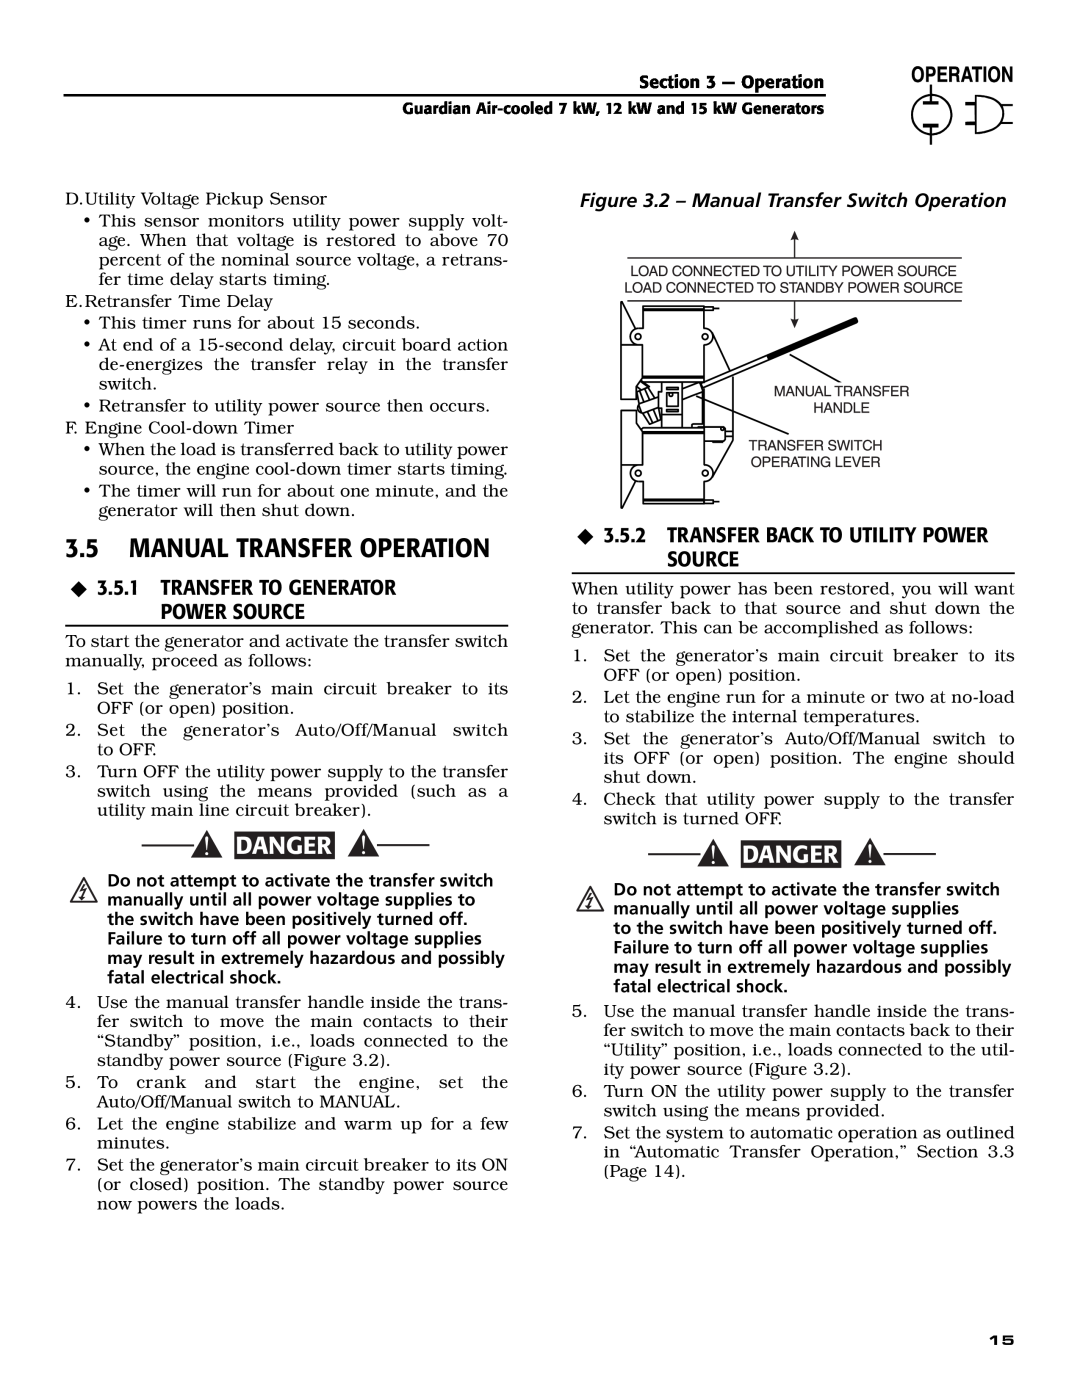 Generac Power Systems 04760-0, 04758-0 Manual Transfer Operation, ‹ 3.5.2 TRANSFER BACK TO UTILITY POWER SOURCE, Danger 